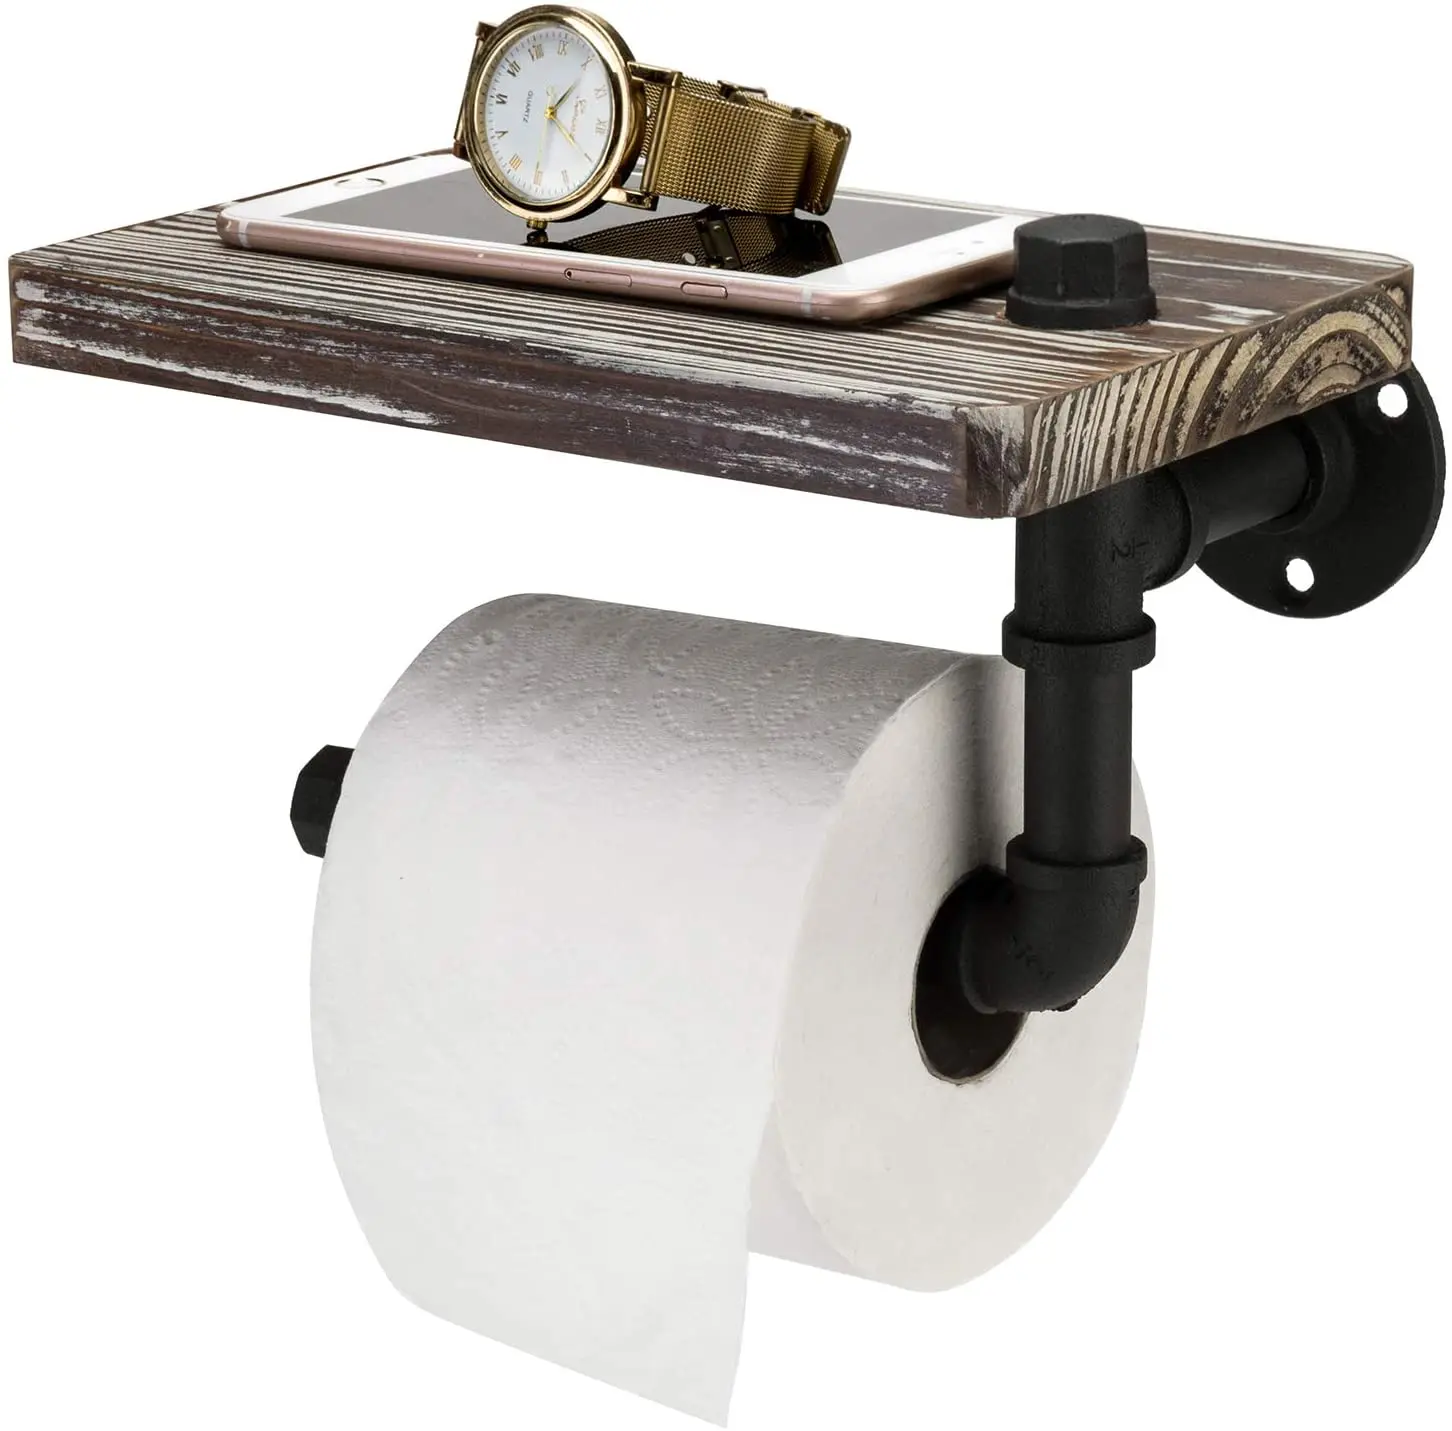 INDUSTRIAL URBAN RETRO WALL MOUNT IRON PIPE TOILET PAPER ROLL HOLDER 